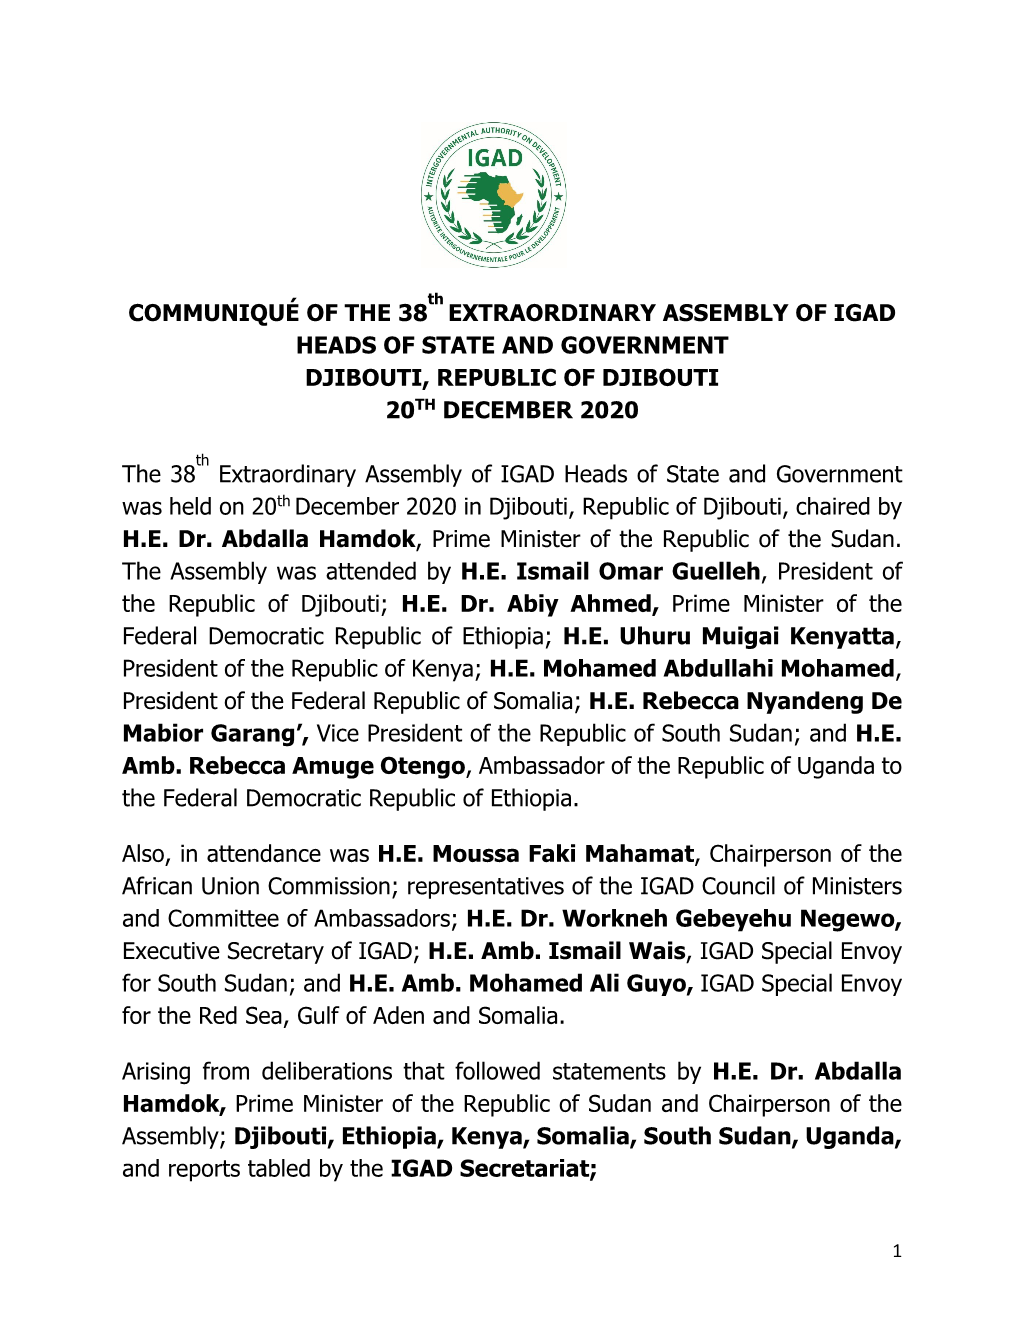 Communiqué of the 38 Extraordinary Assembly of Igad Heads of State and Government Djibouti, Republic of Djibouti 20Th December 2020